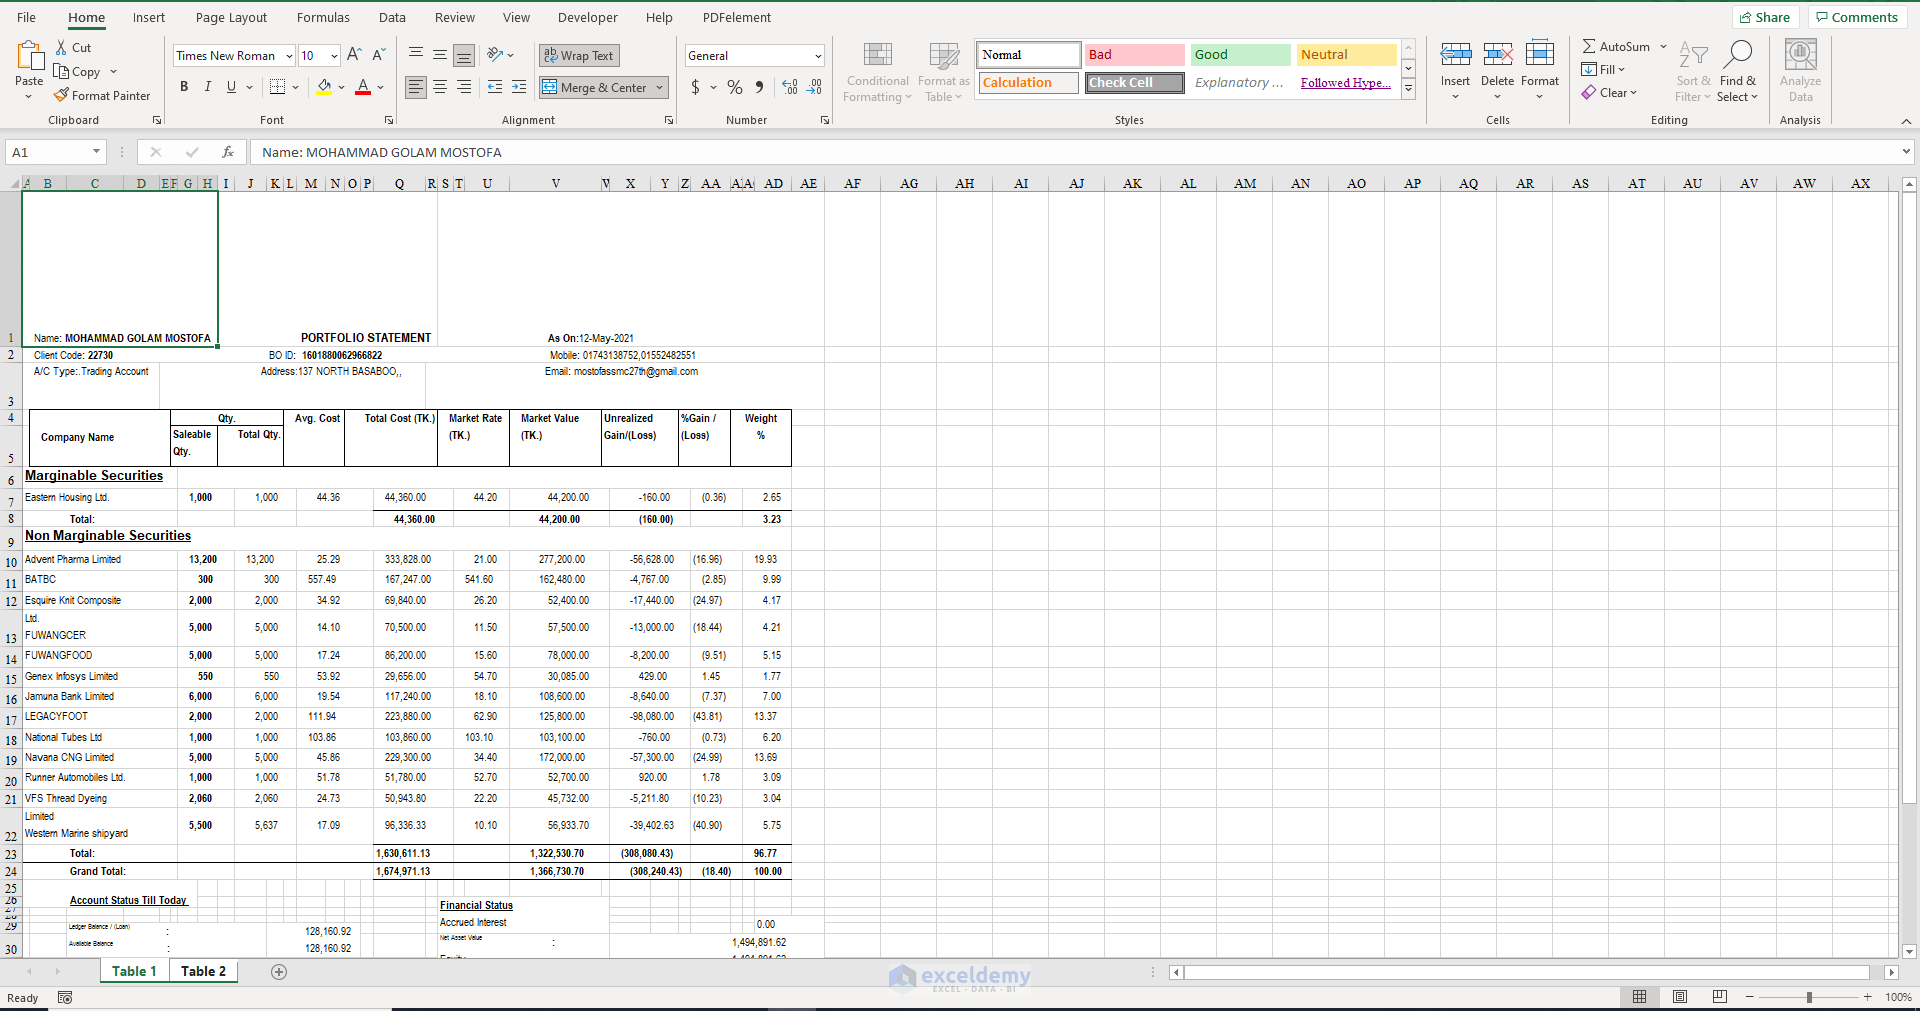 Excel file after conversion